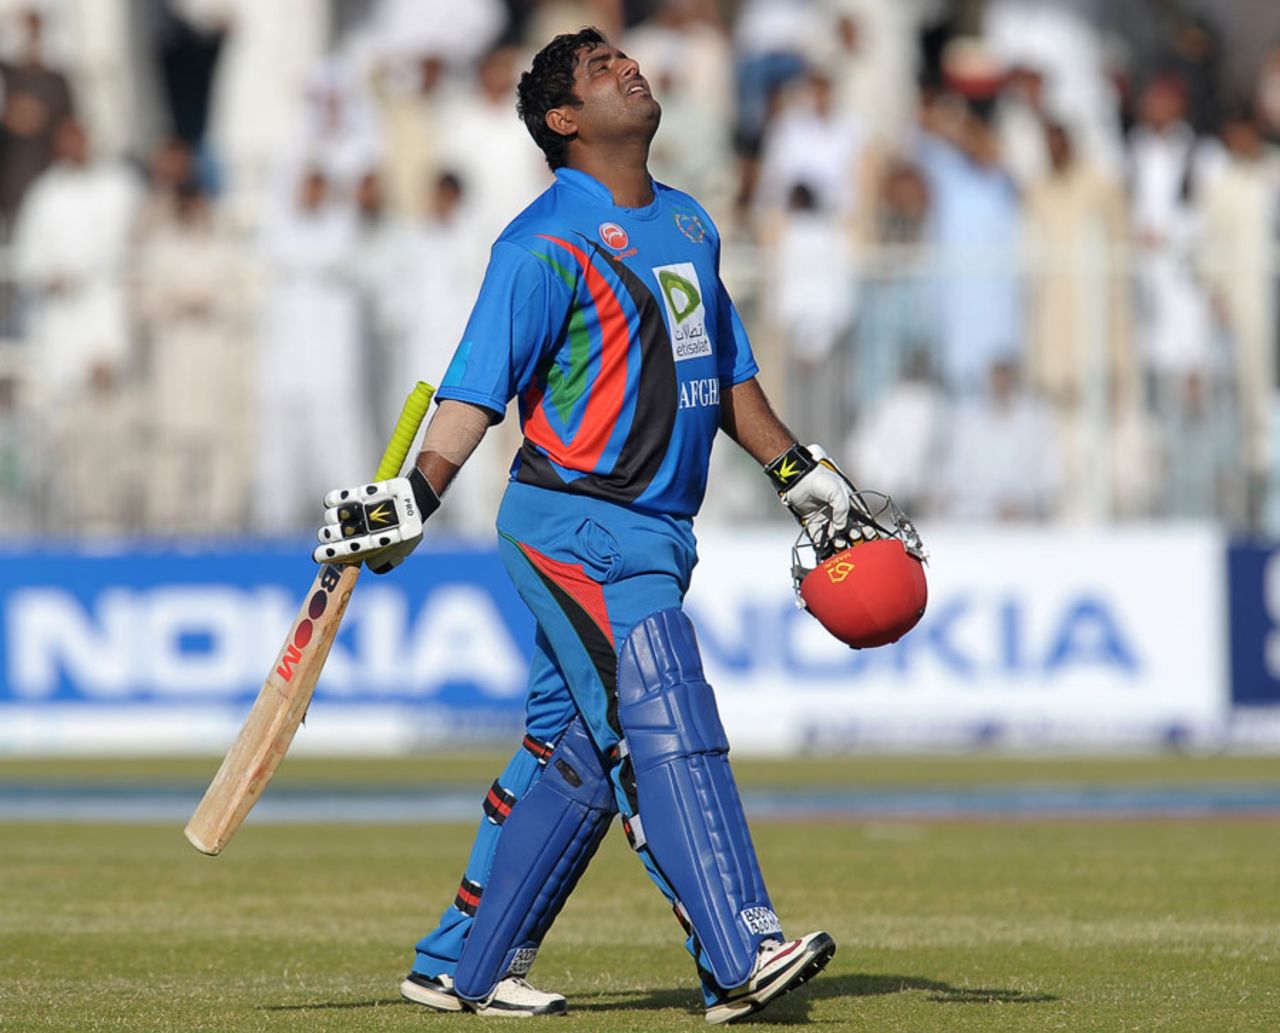 Mohammad Shahzad walks back dejected after falling to Shahid Afridi, Afghanistan v Pakistan, one-off ODI, Sharjah, February 10, 2012